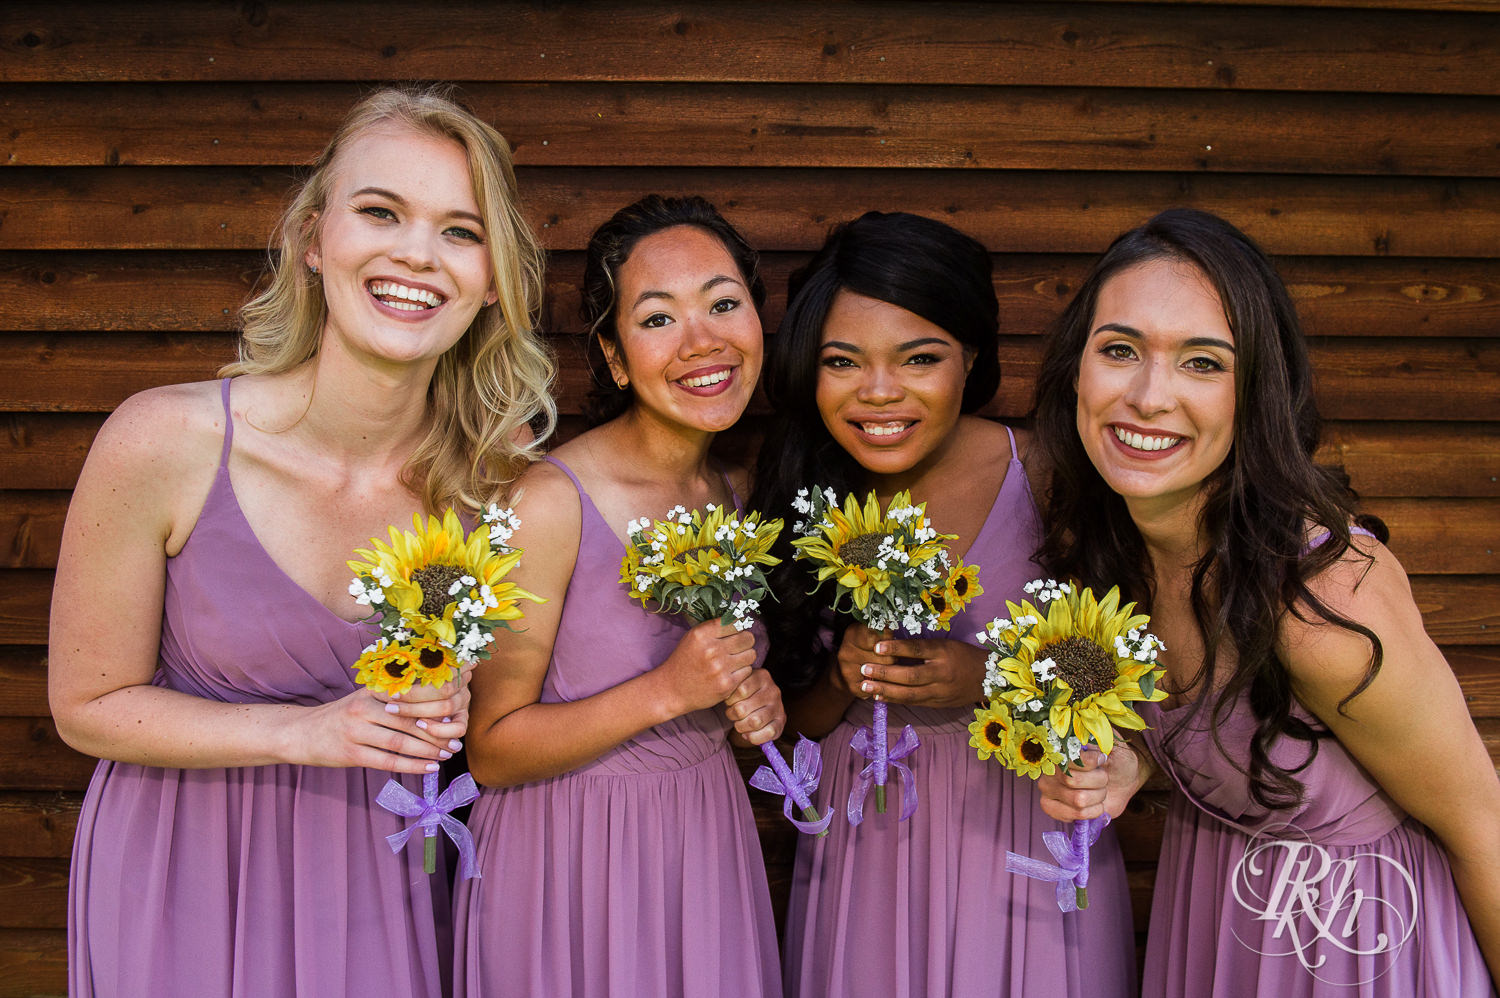 Wedding party smiles holding sunflowers during barn wedding at Birch Hill Barn in Glenwood City, Wisconsin.